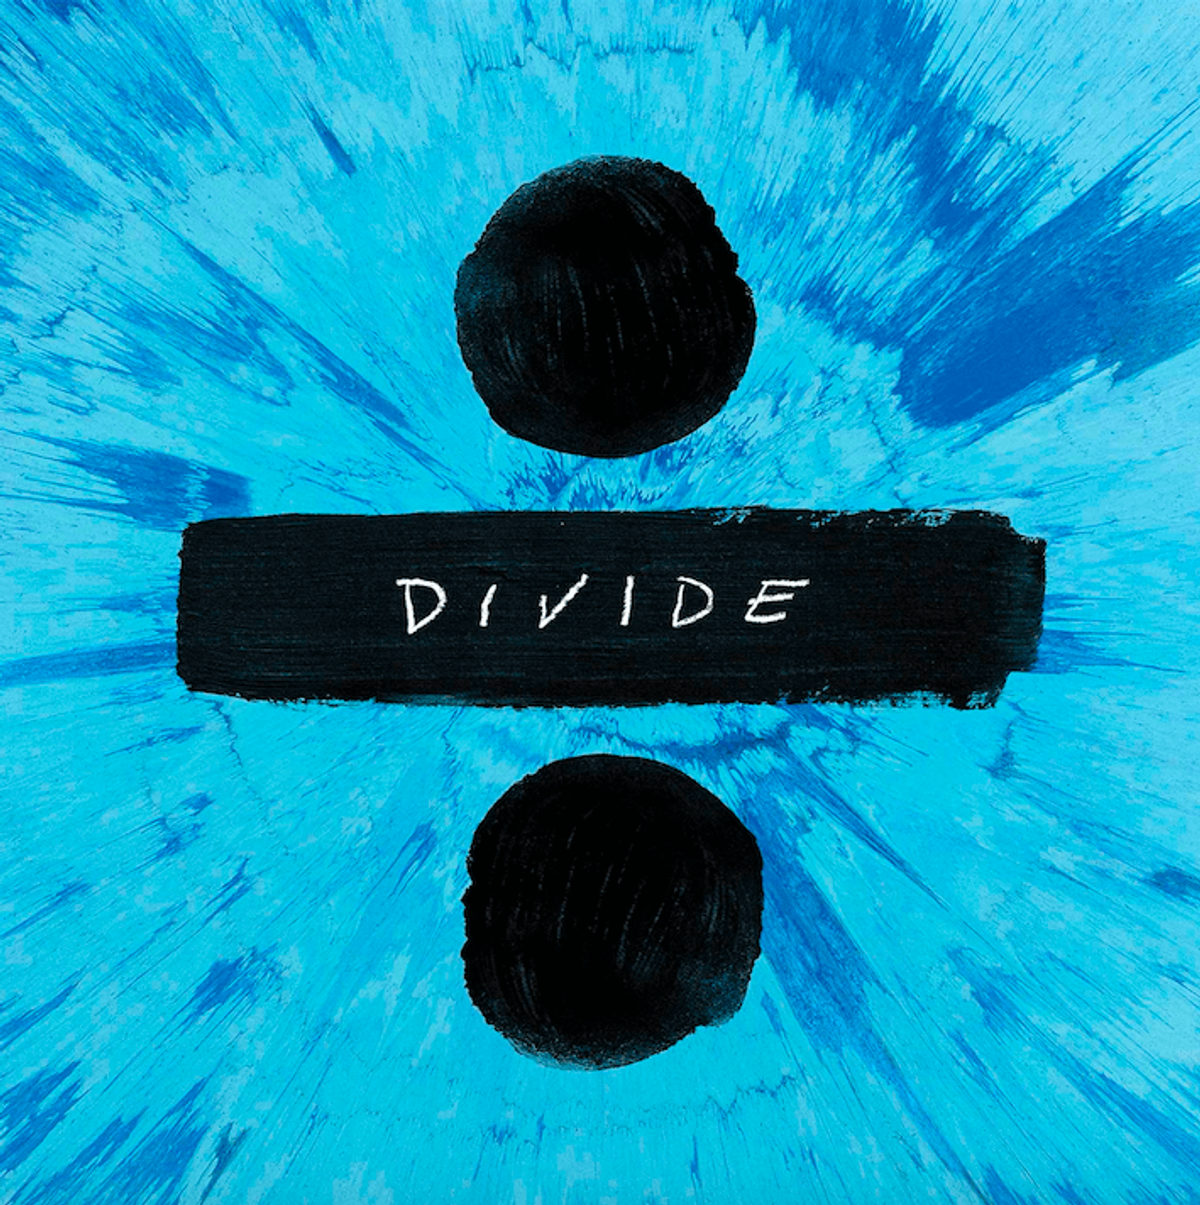 Reviewing Every Song On Ed Sheeran's New Album